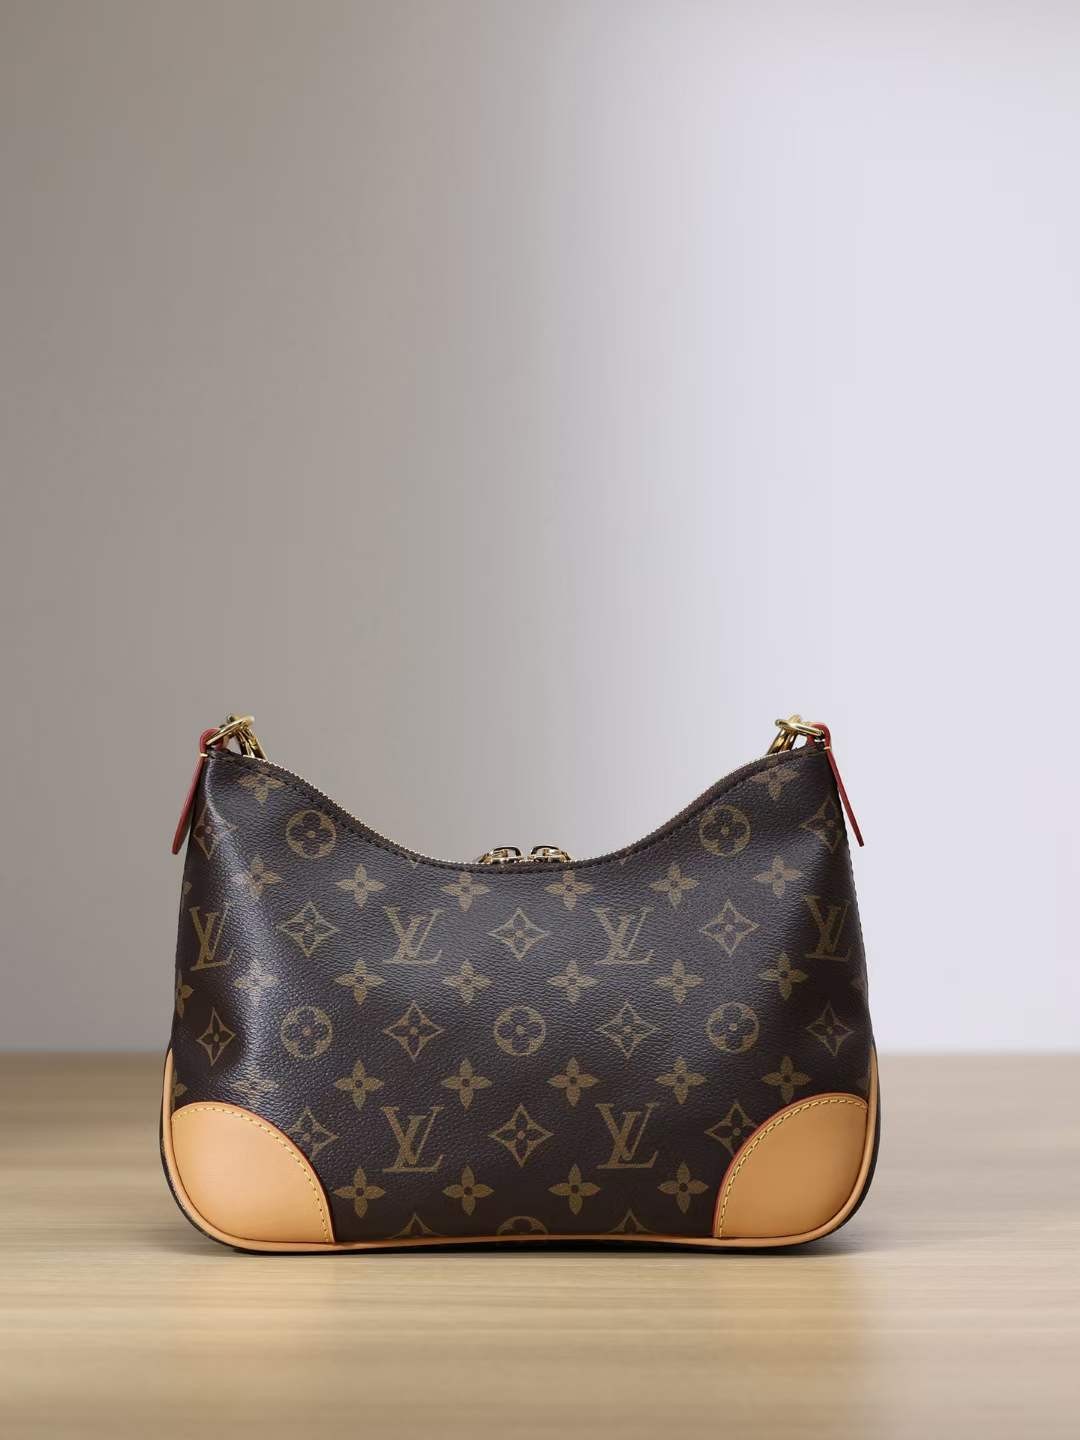 Louis Vuitton M45832 Boulogne Top Replica Handbag Overall Appearance (2022 Latest)-Best Quality Fake designer Bag Review, Replica designer bag ru